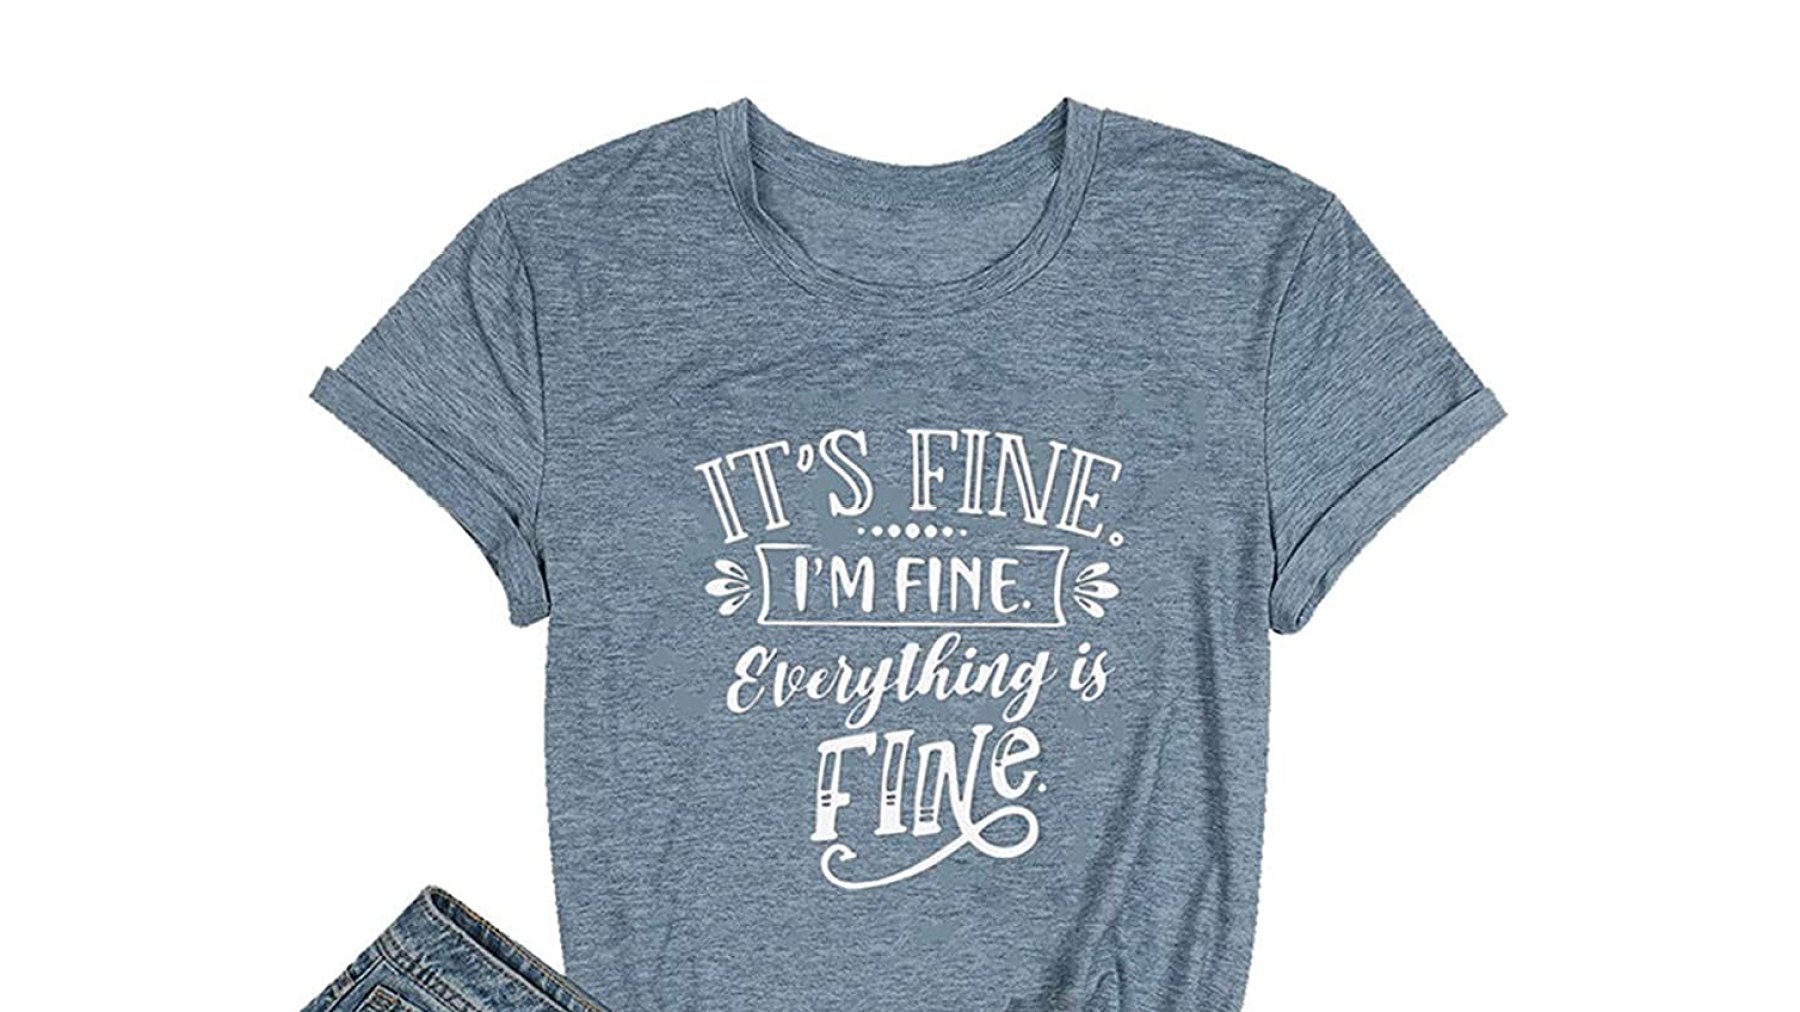 Amazon Sarcastic Graphic Tee Is What We All Need Right Now | UsWeekly